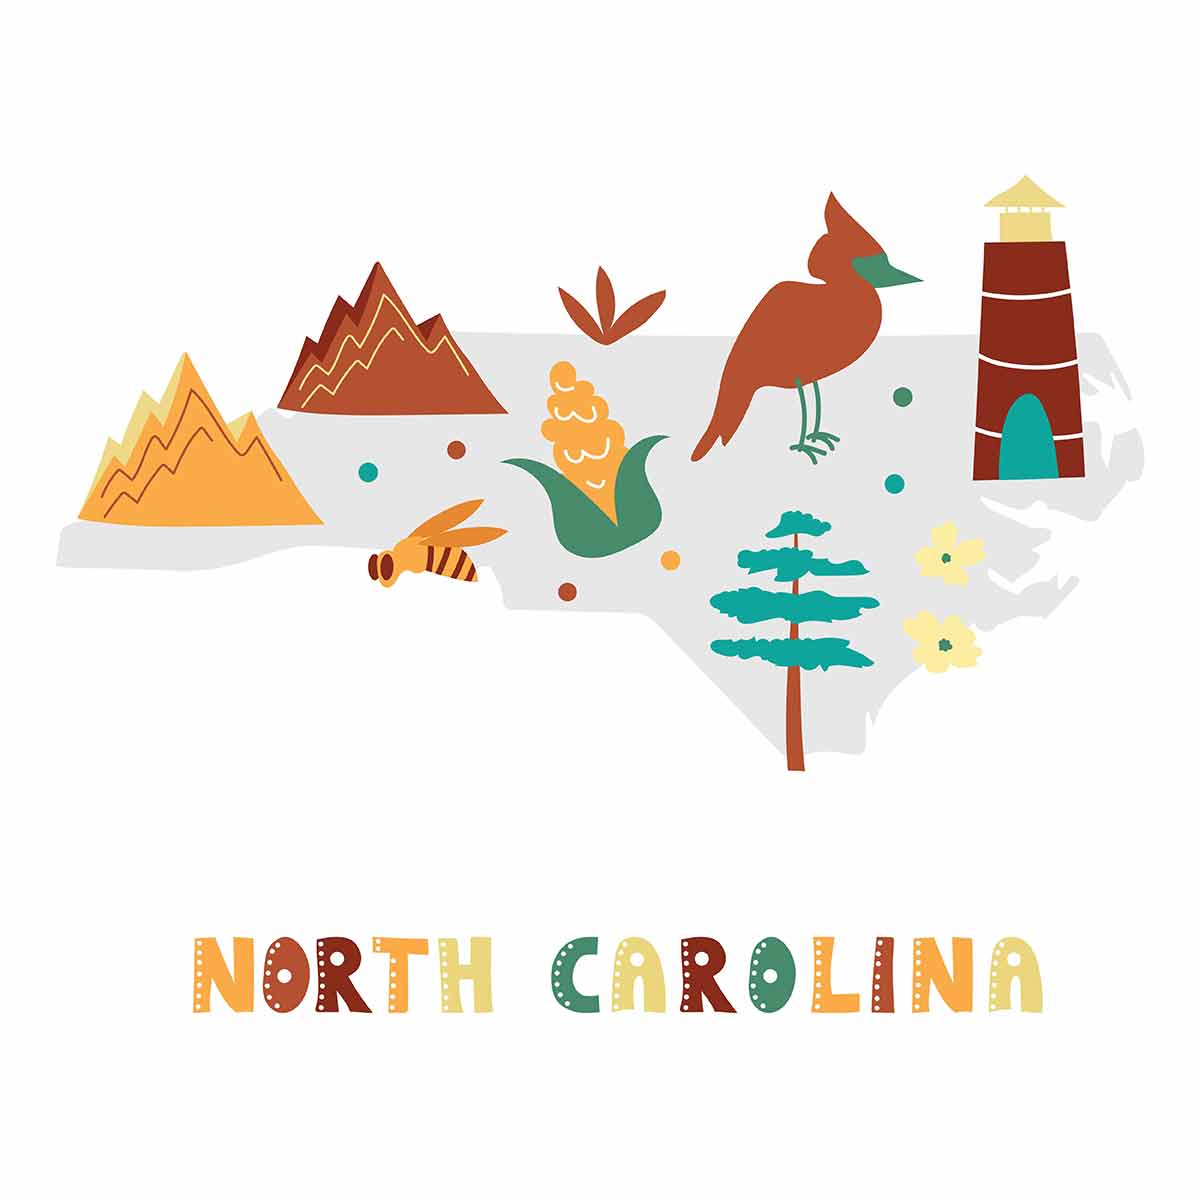 national parks in north carolina list State symbols and nature on gray state silhouette - North Carolina. Cartoon simple style for print